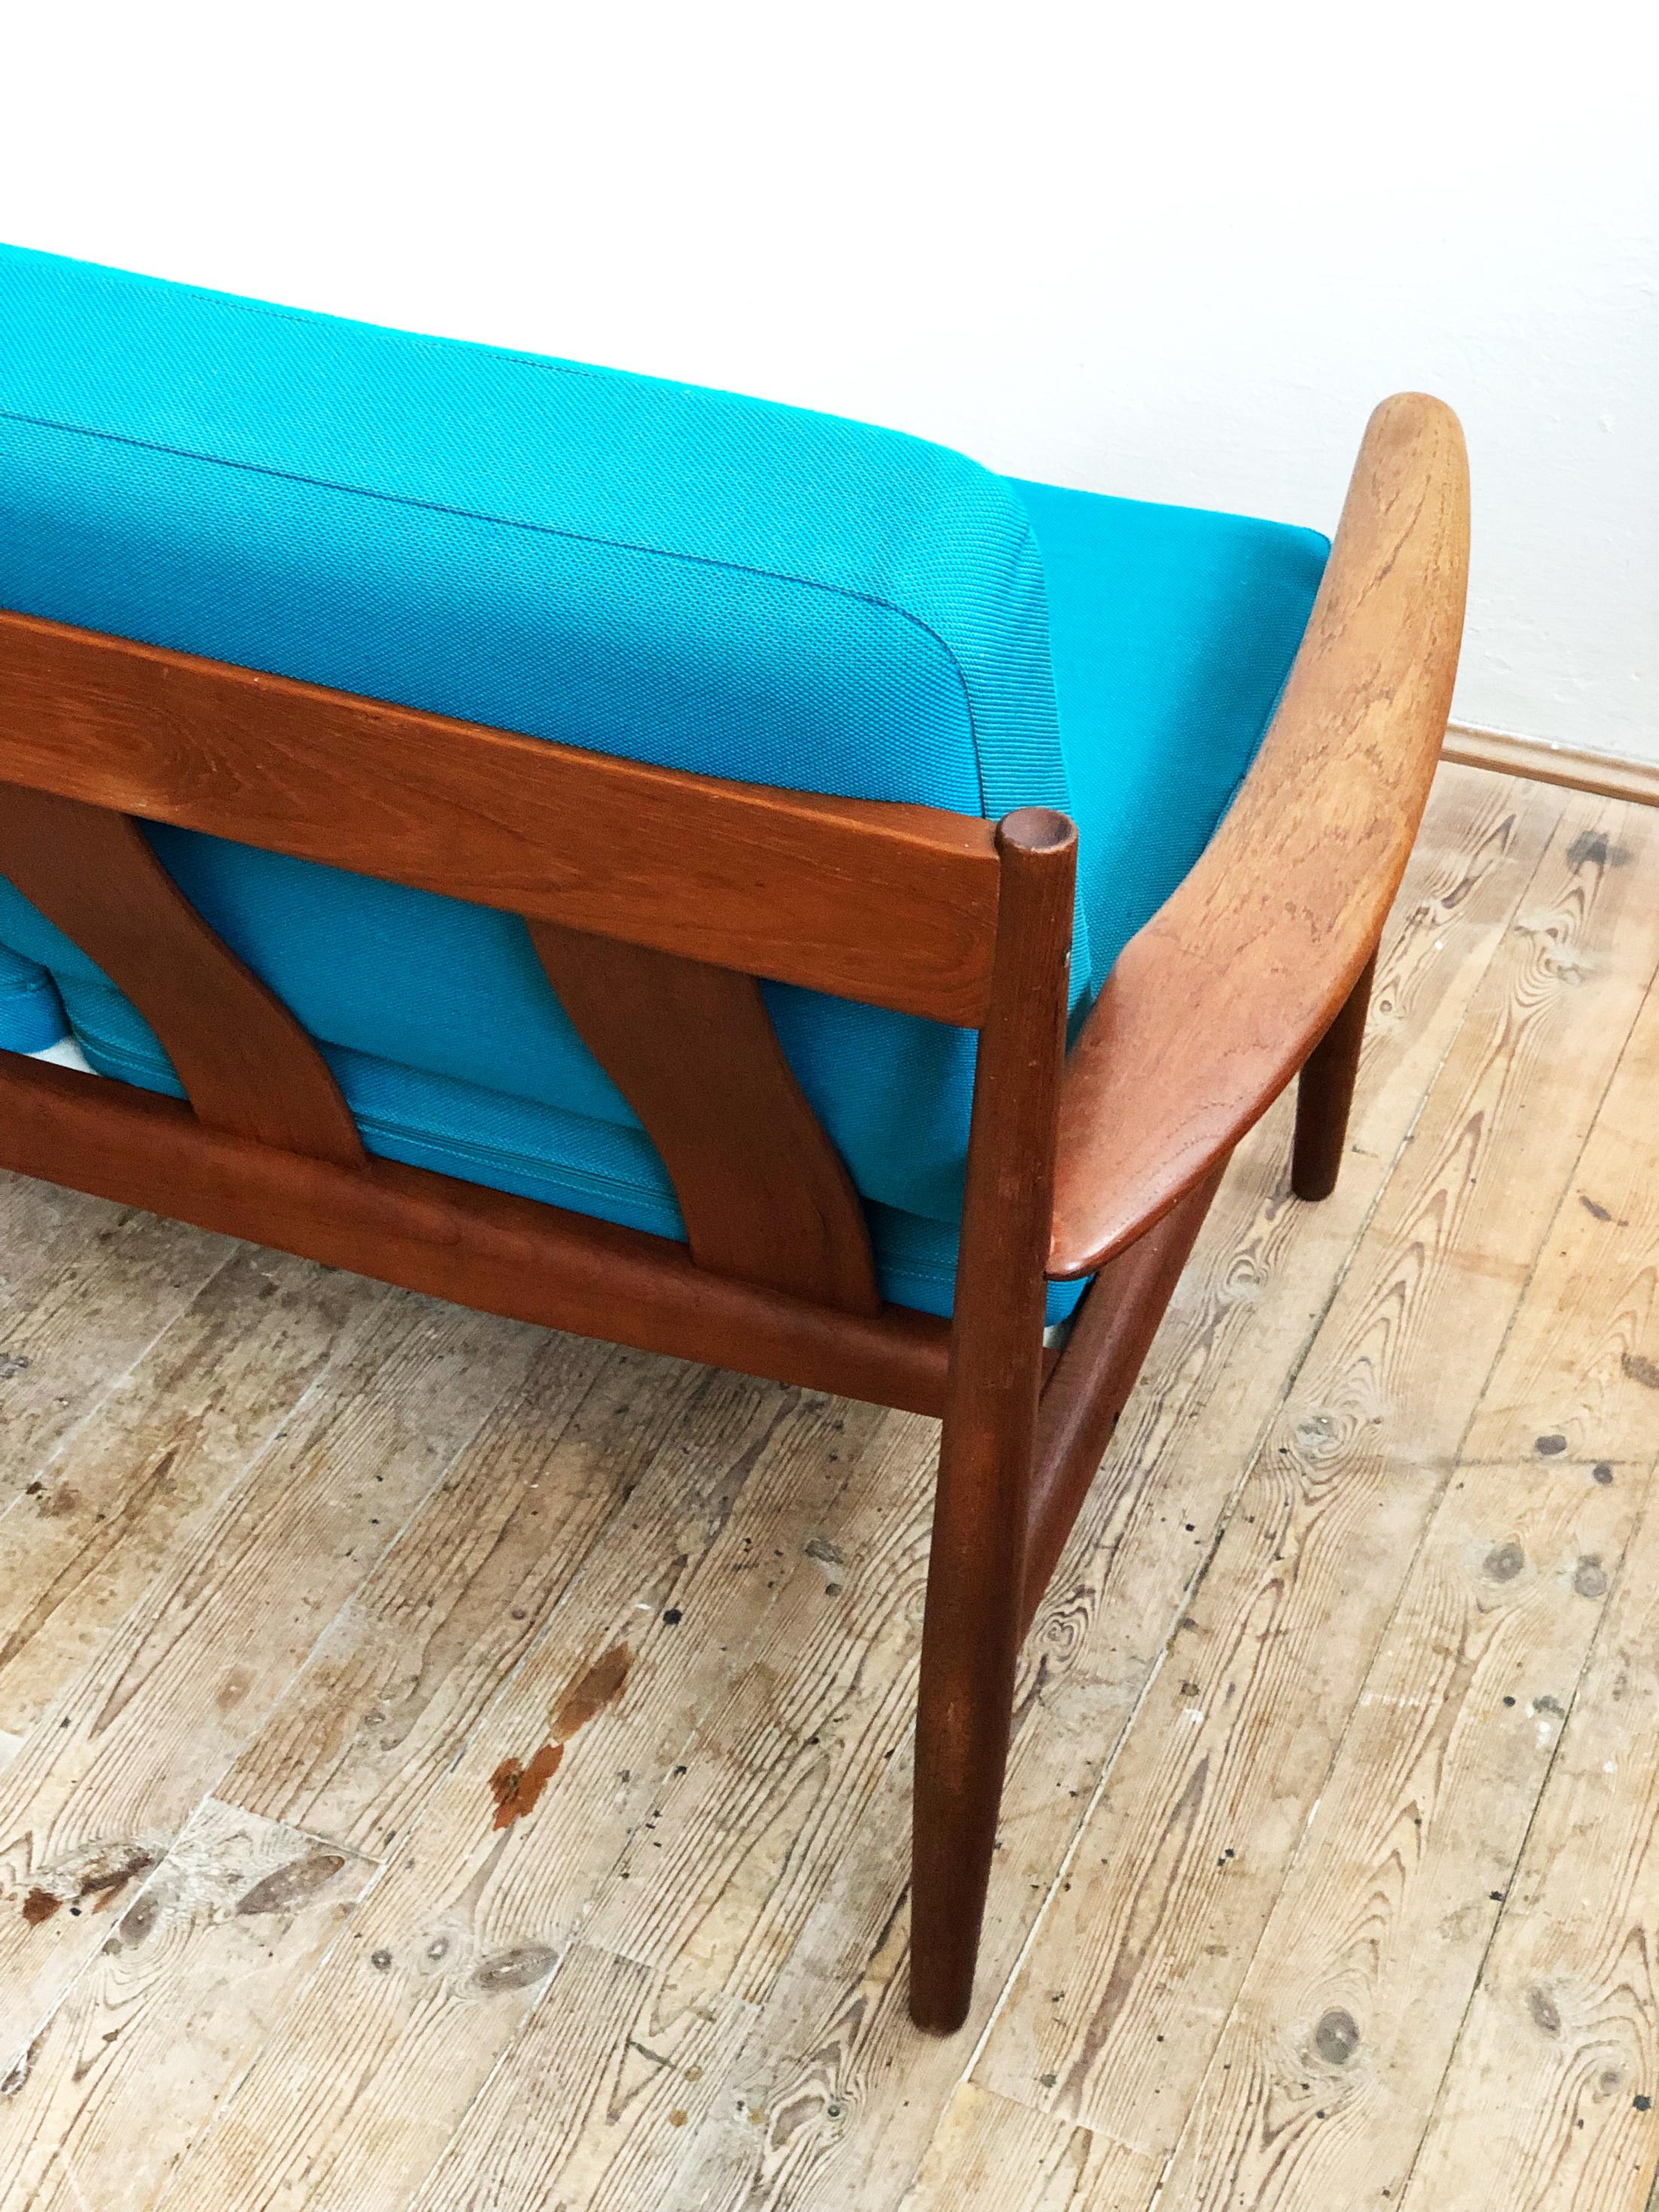 Midcentury Teak Sofa with Turquoise Upholstery by Grete Jalk for France & Son  In Good Condition For Sale In Munich, Bavaria